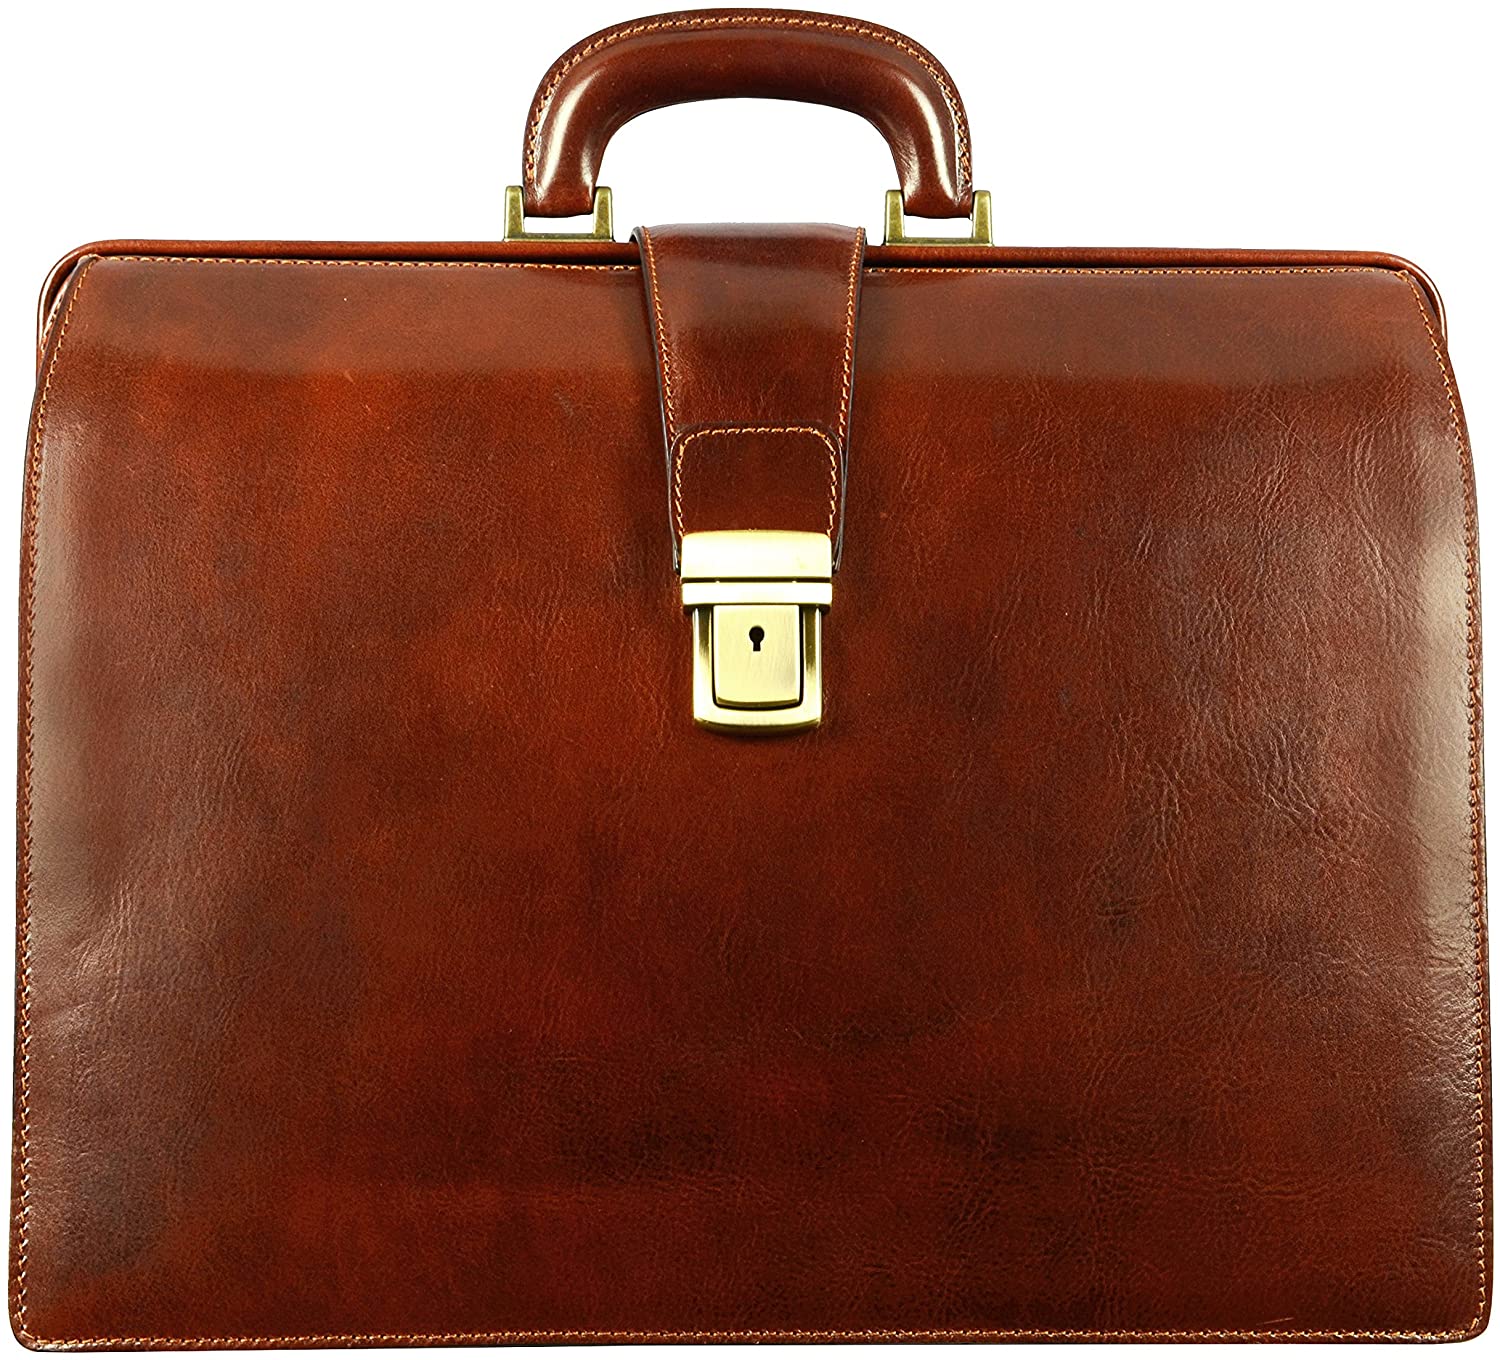 The Attorney laptop leather bag